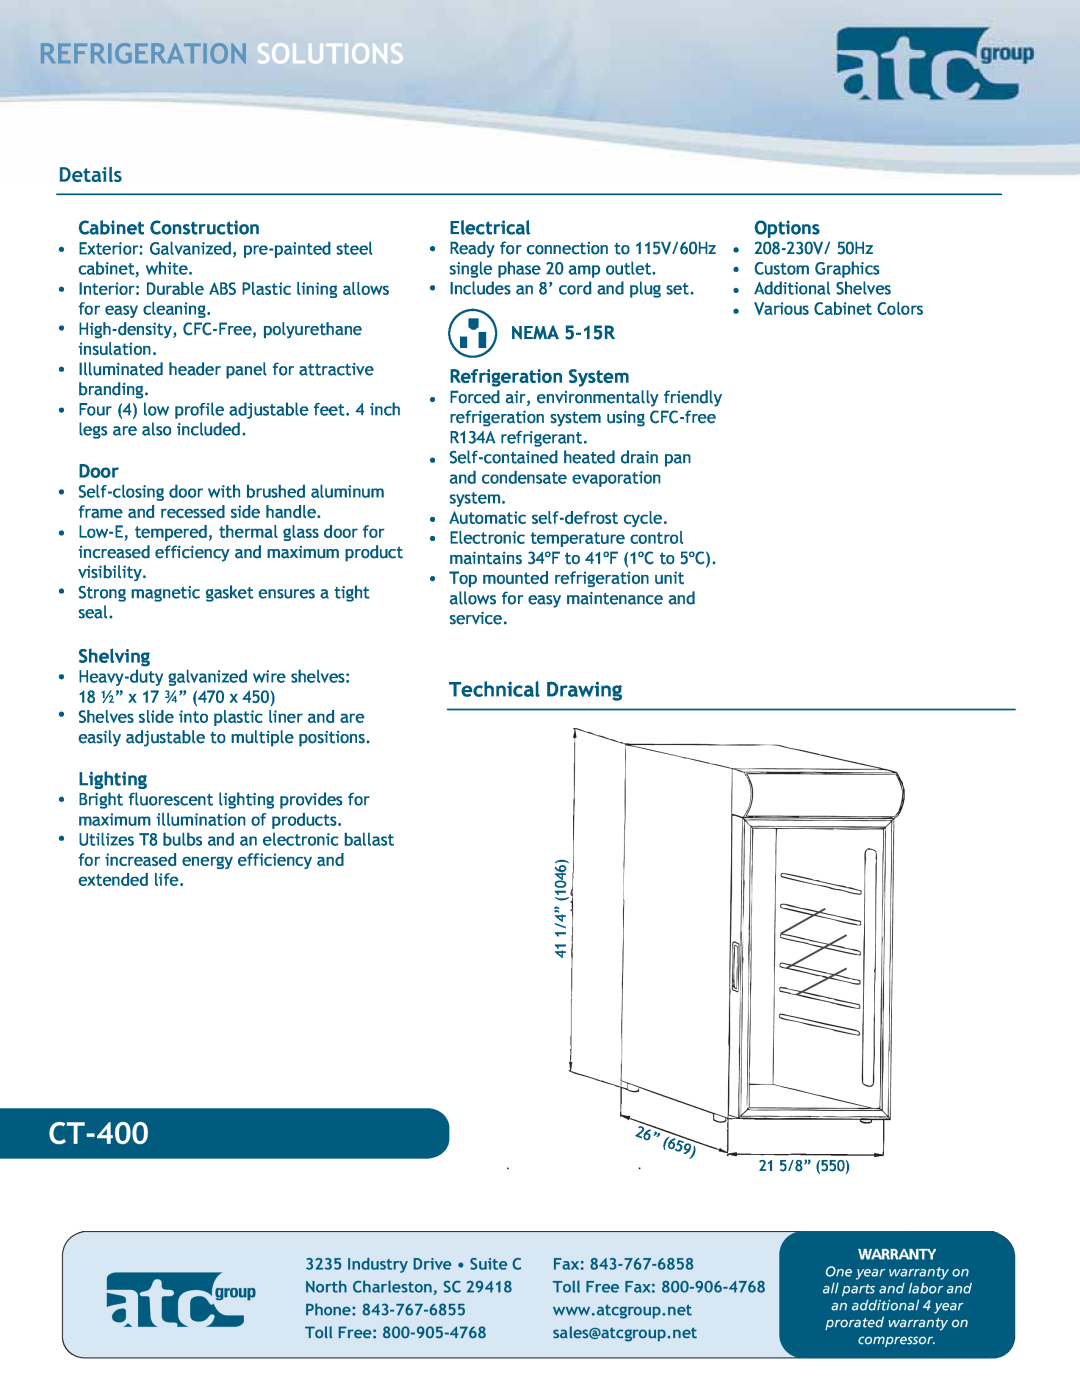 ATC Group CT-100F CT-400, Refrigeration Solutions, Details, Cabinet Construction, Door, Electrical, Options, NEMA 5-15R 